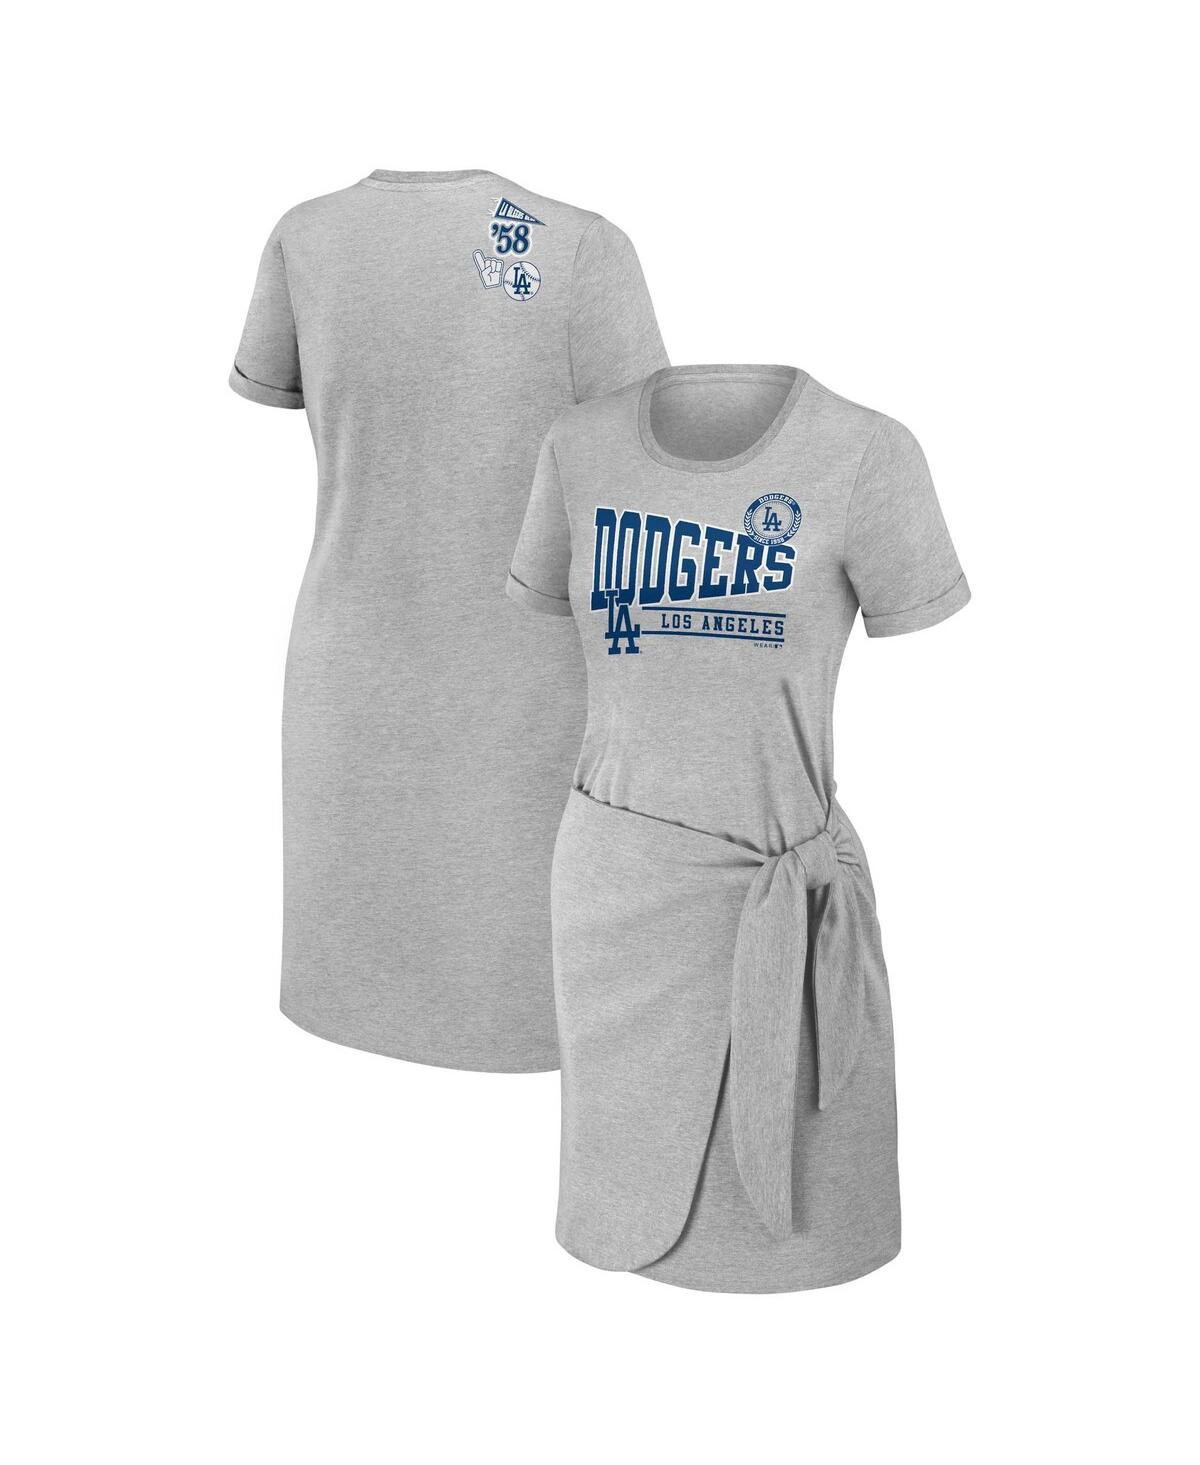 Women's Wear by Erin Andrews Heather Gray Los Angeles Dodgers Knotted T-shirt Dress - Heather Gray